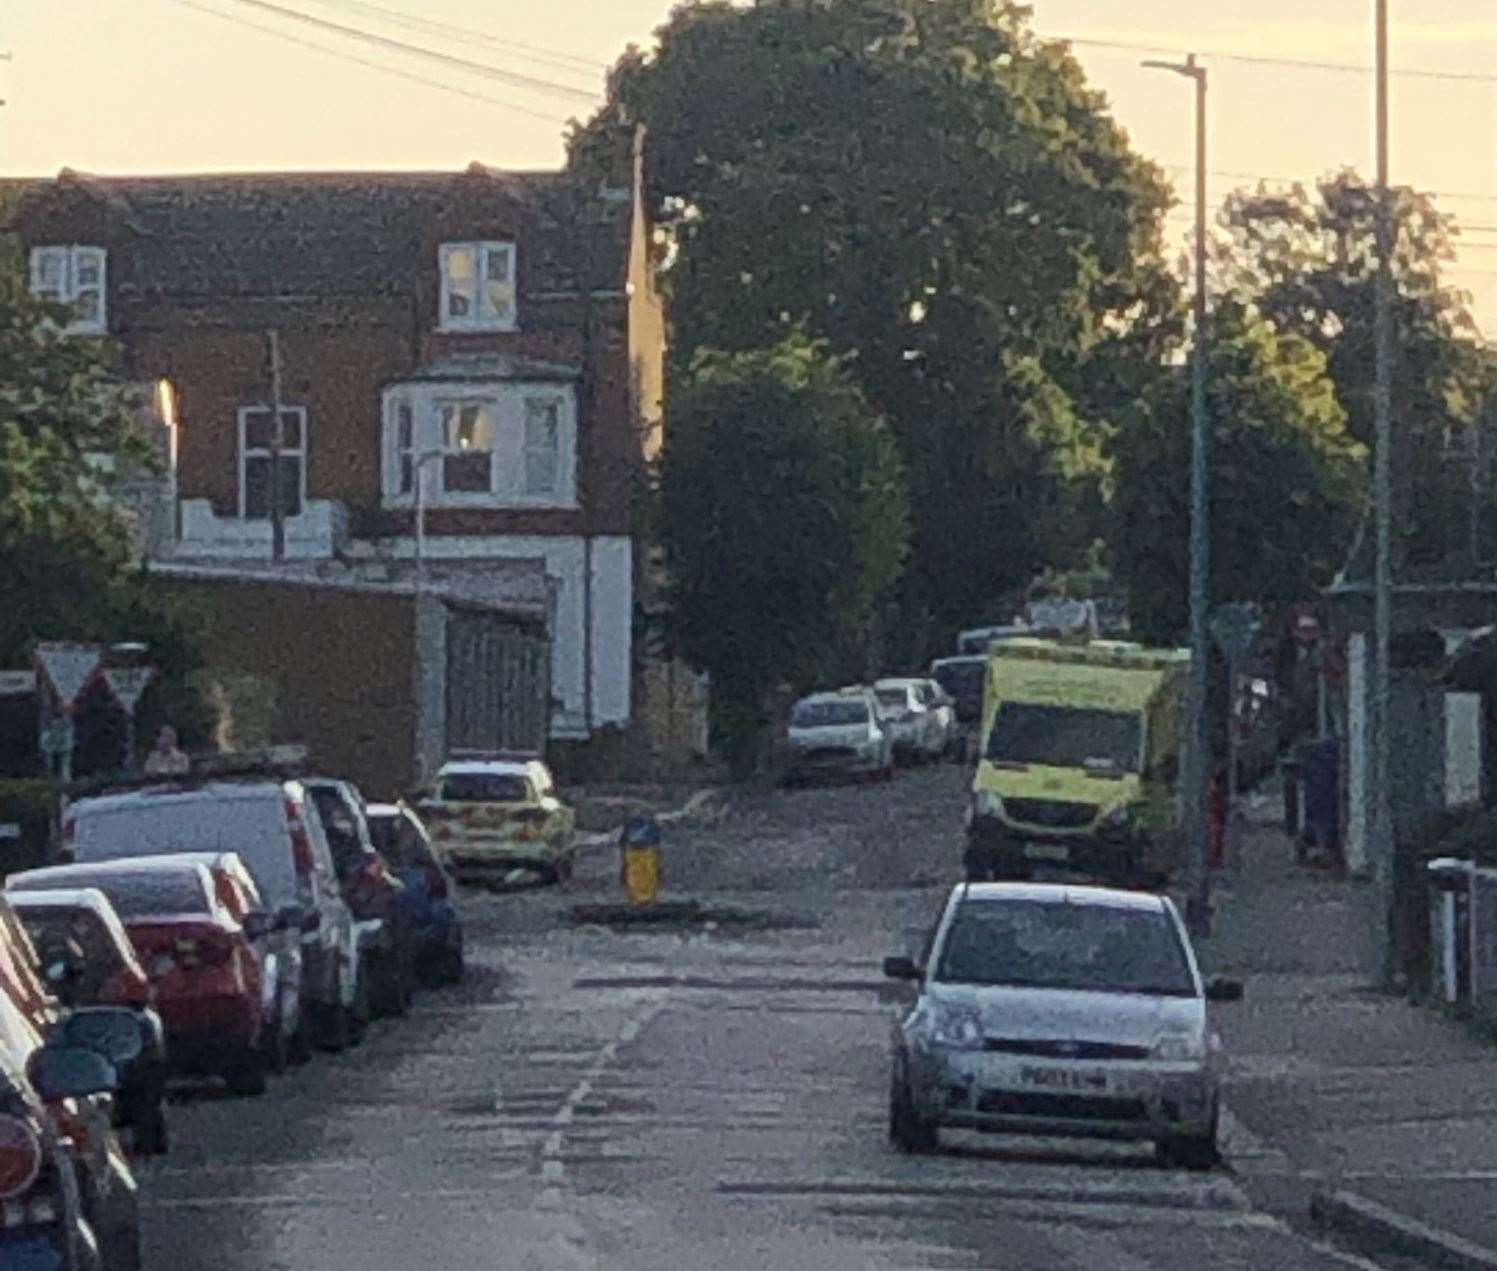 Emergency services were called to the incident in Herne Bay last week